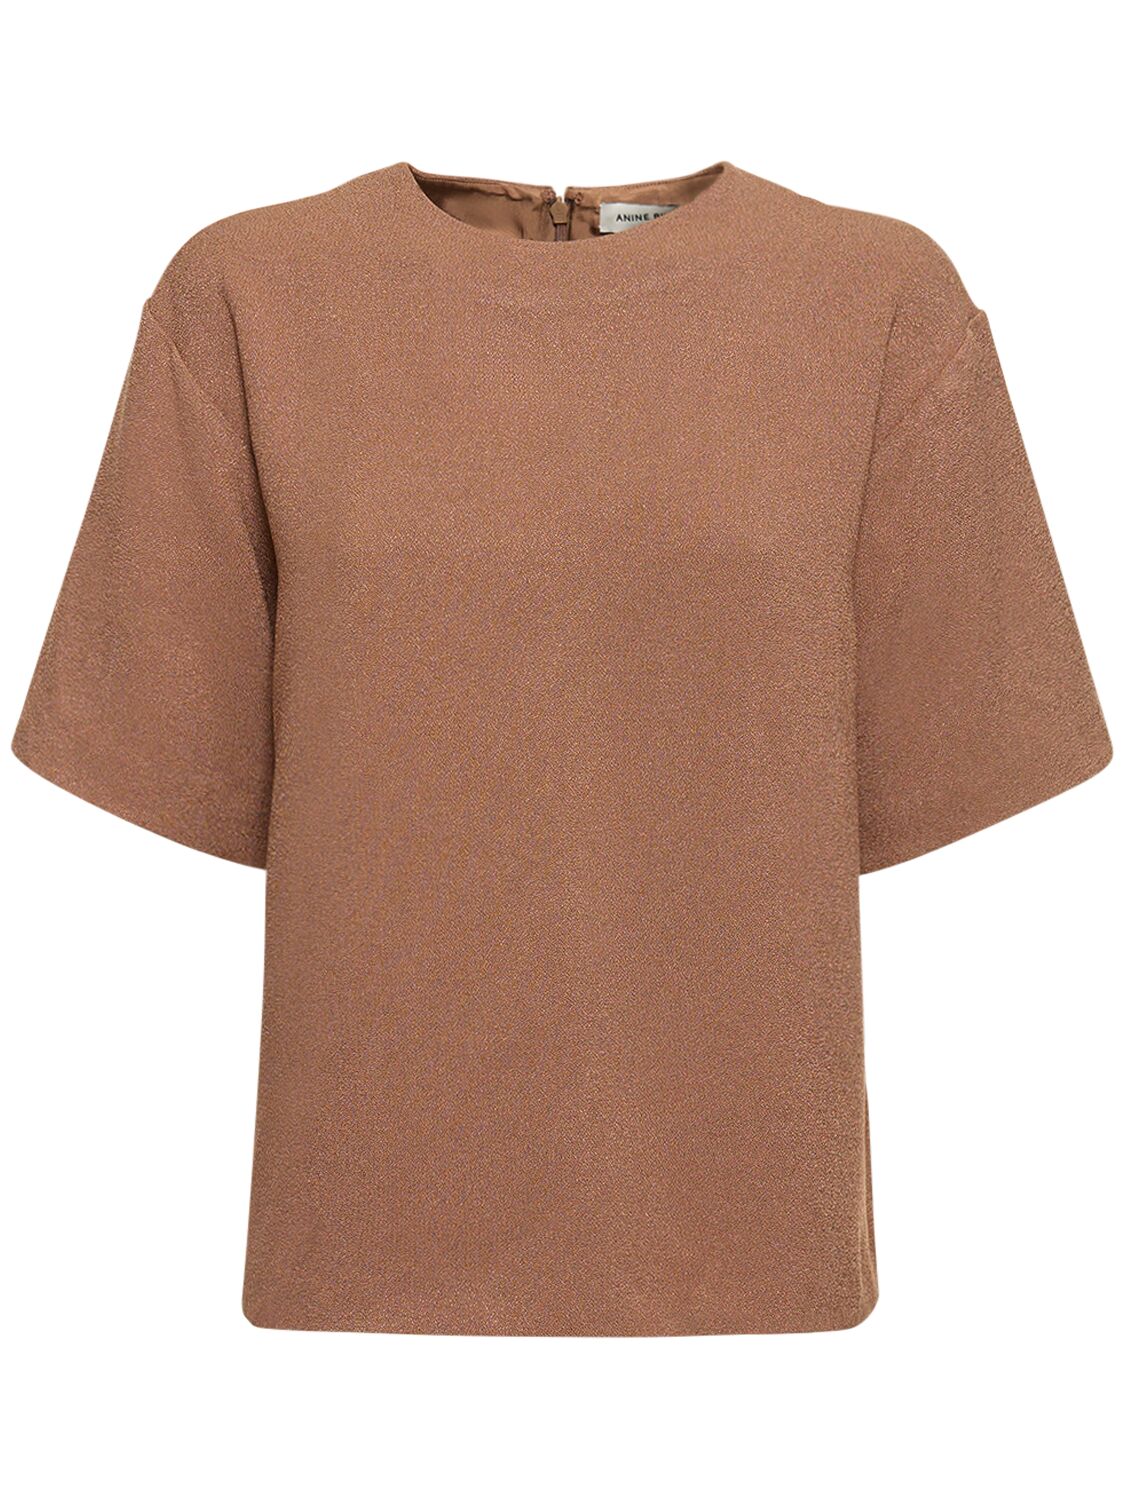 Image of Maddie Tech Crepe Top